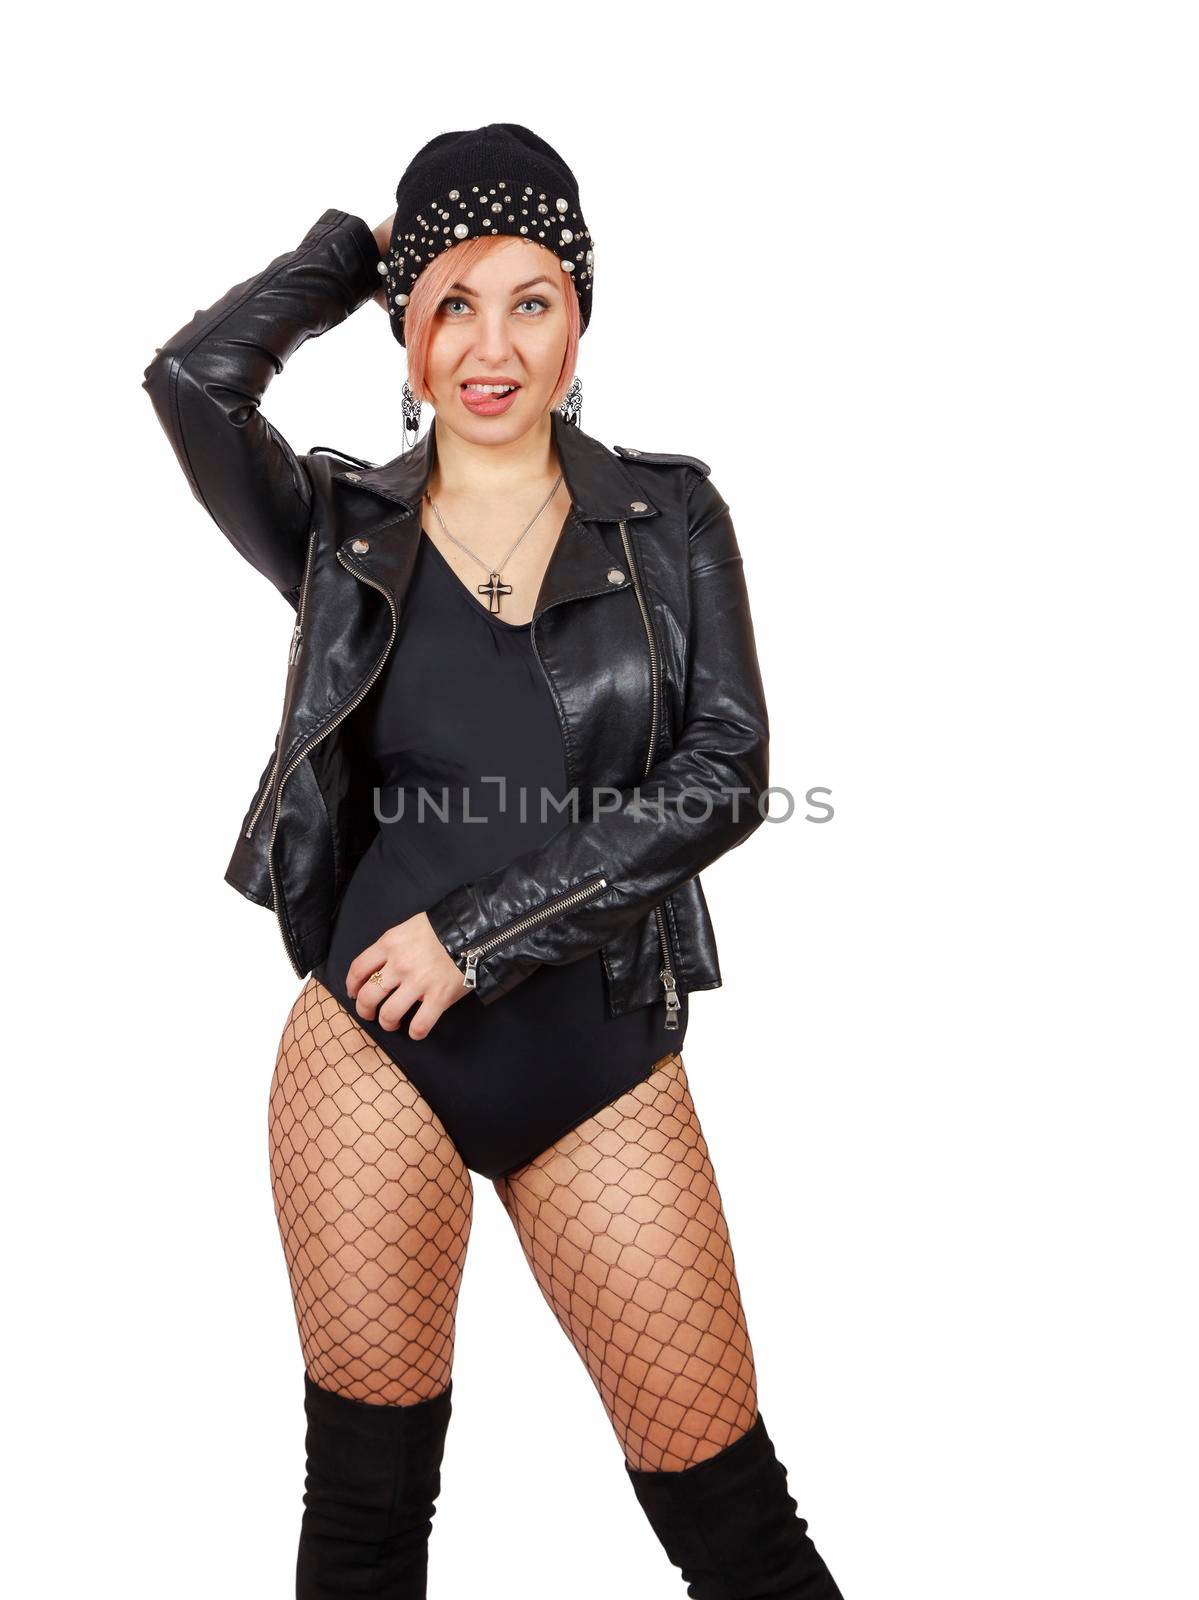 young woman in leather jacket, hat, mesh tights posing standing by raddnatt